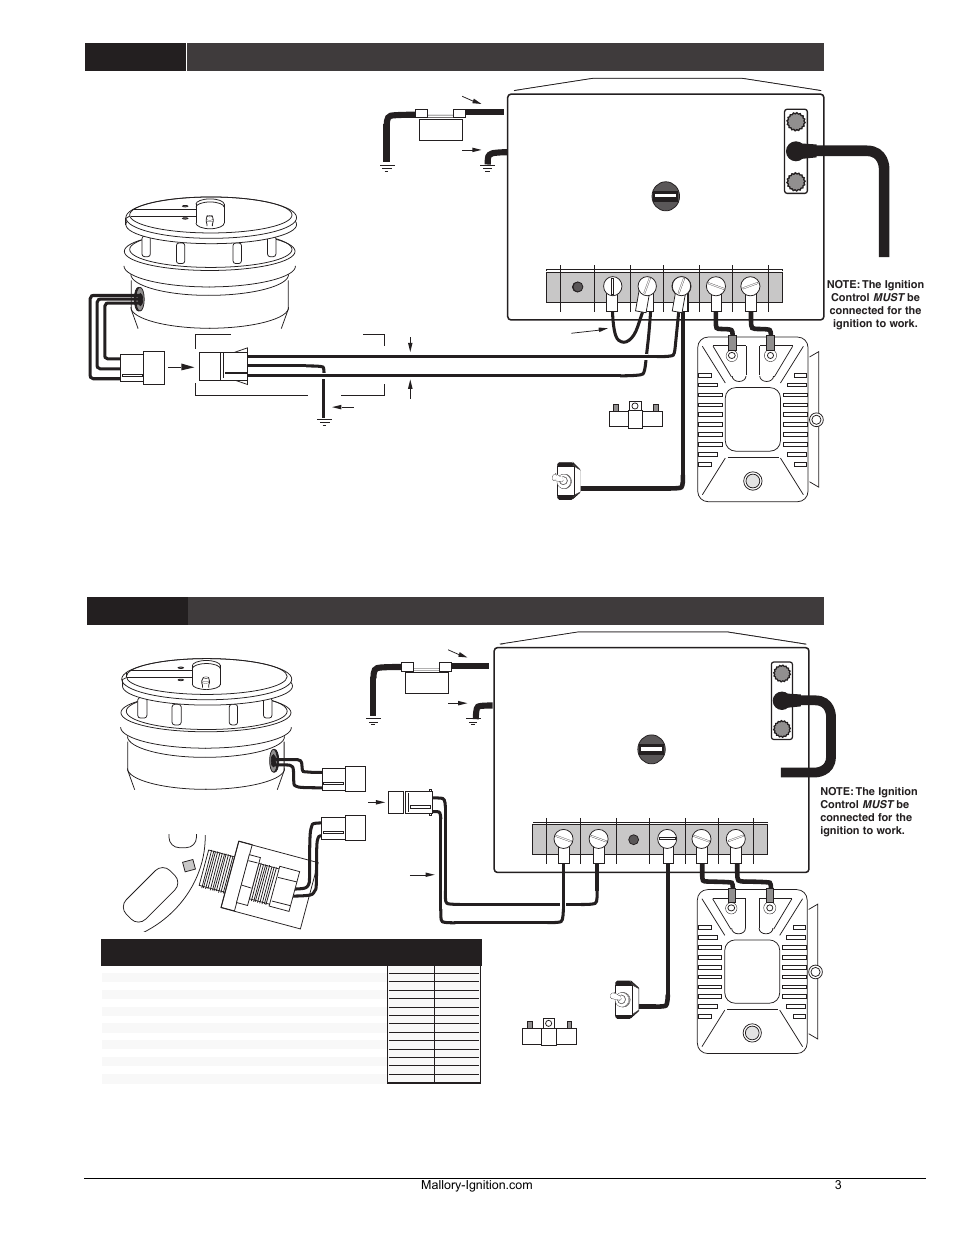 mallory promaster coil wiring diagram